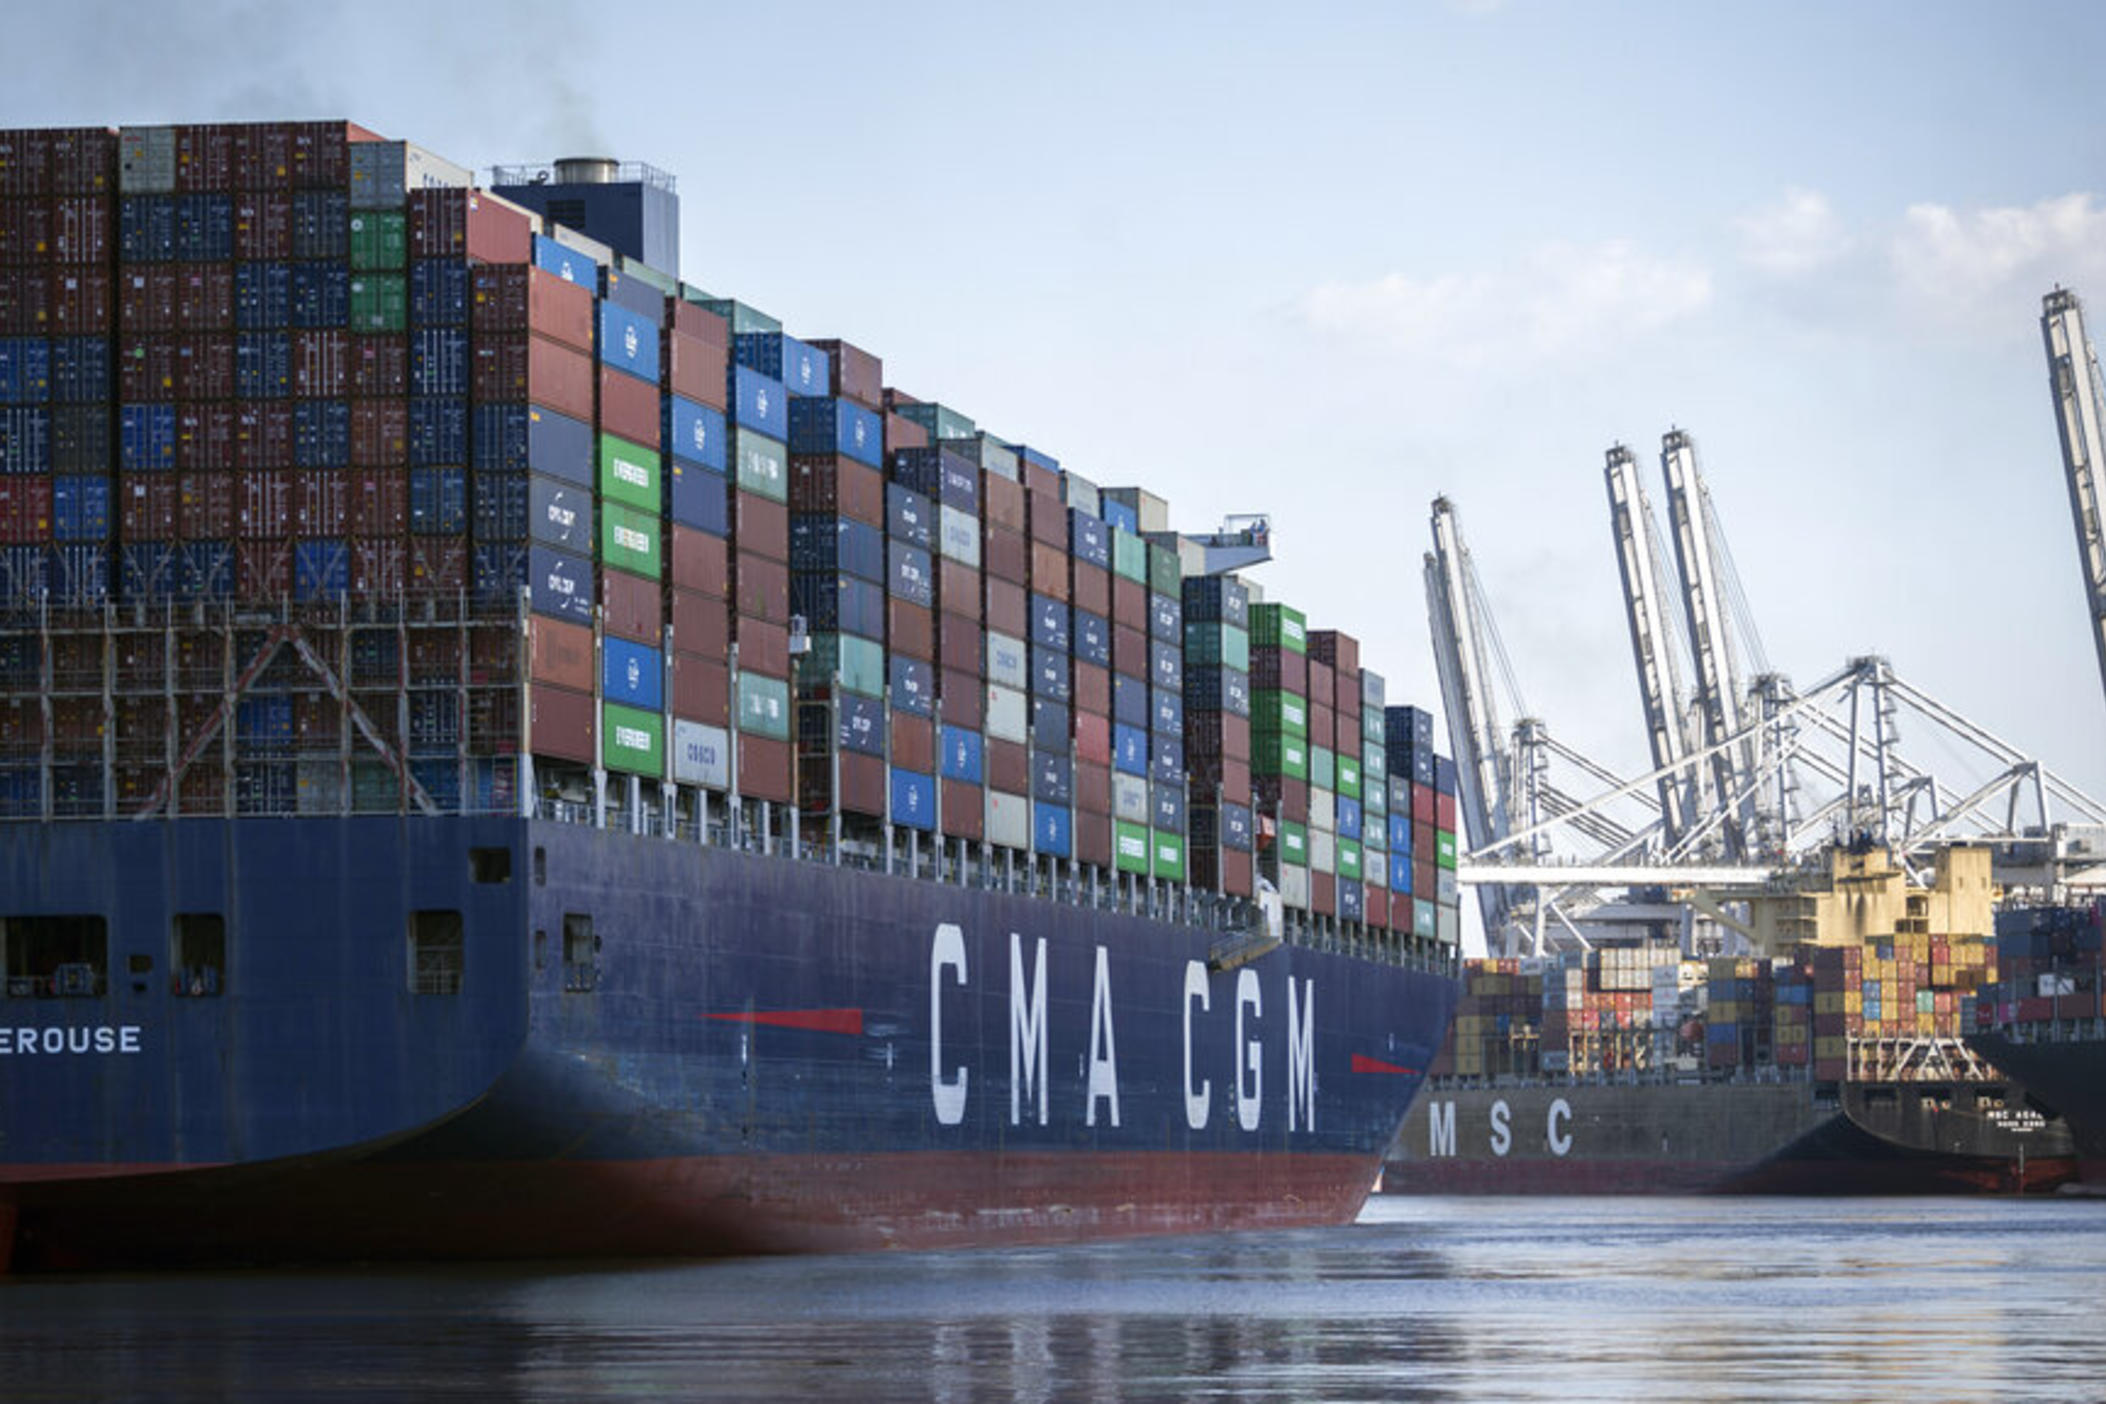 The container ship CMA CGM Laperouse, left, docks at the Georgia Ports Authority's Port of Savannah, Sept. 29, 2021, in Savannah, Ga. The Port of Savannah saw a whopping 20% increase in shipping containers moving across its docks in 2021 as U.S. seaports scrambled to keep up with a surge in cargo that crammed container yards and forced ships to line up and wait at sea.